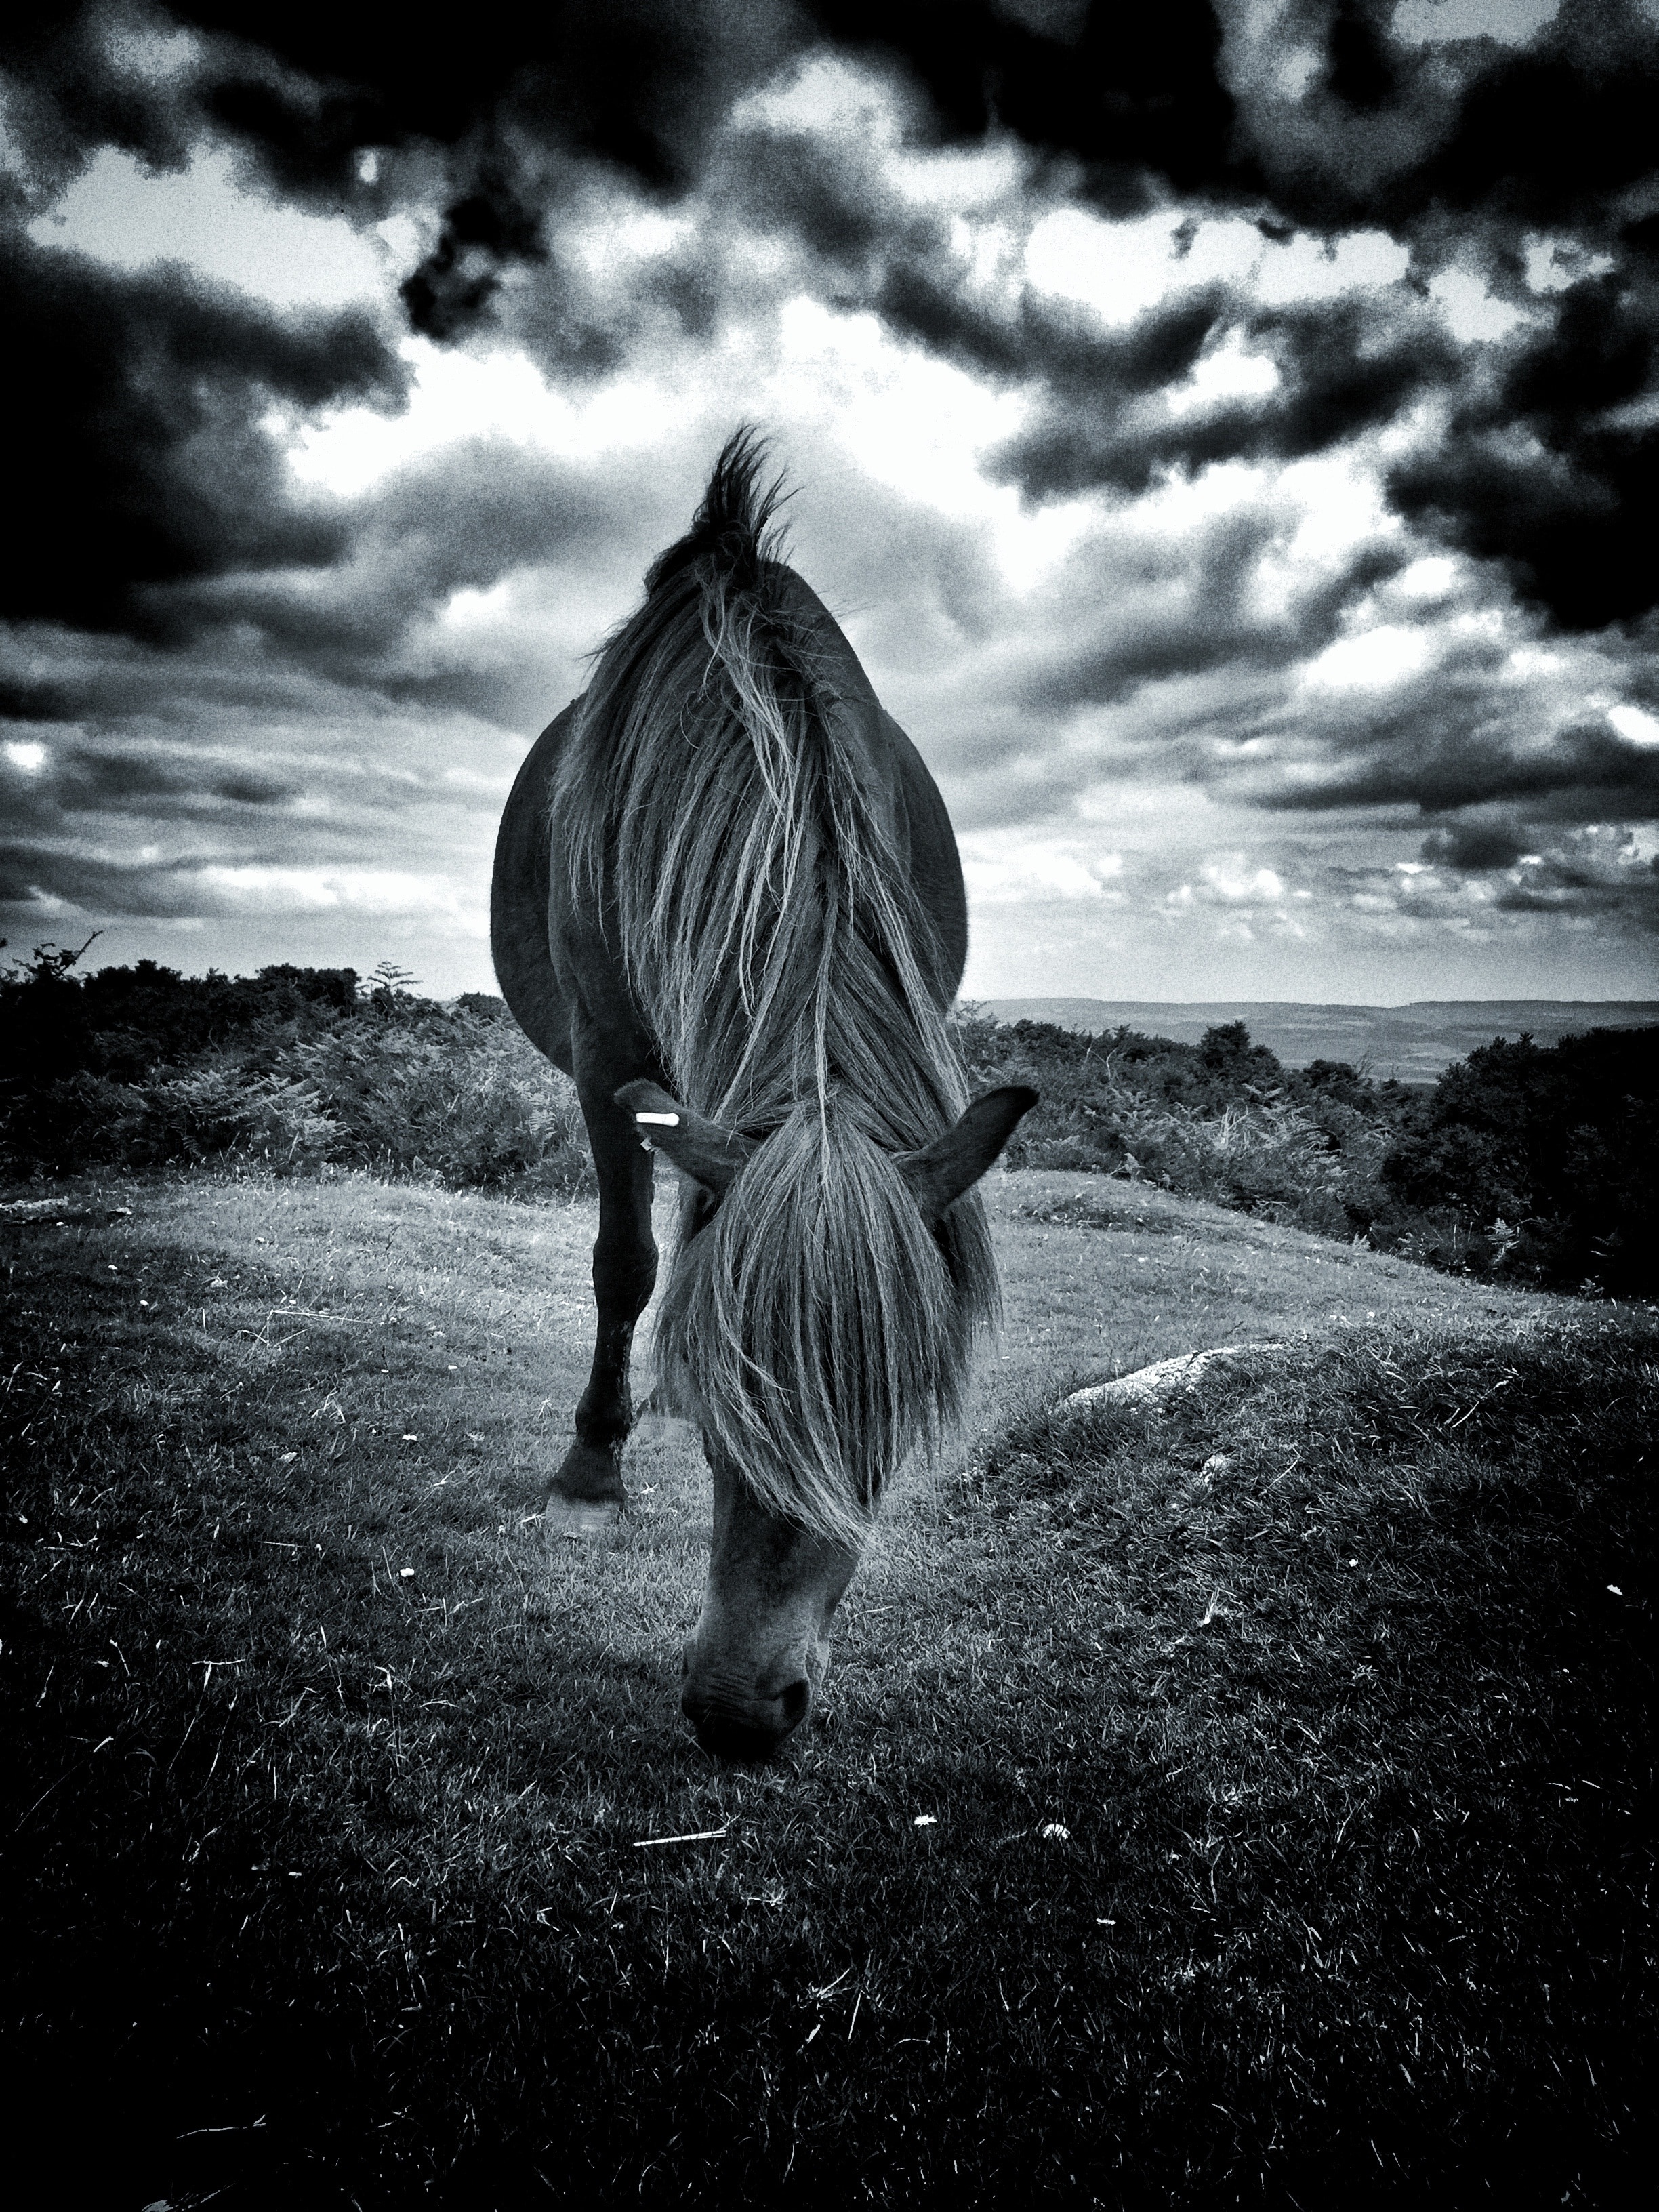 grayscale photo of horse